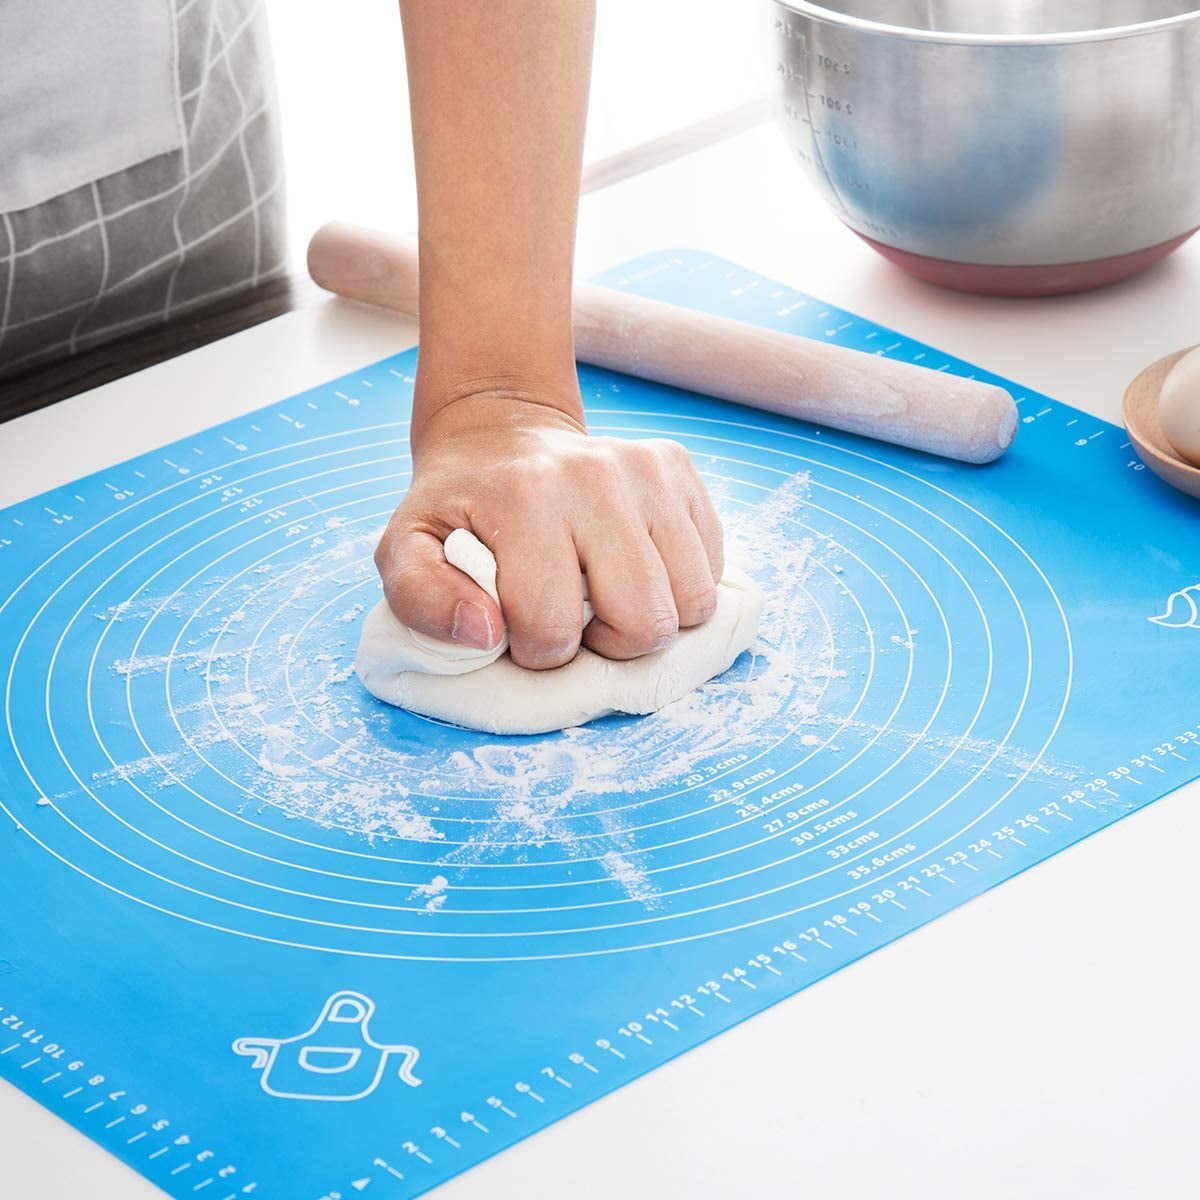 Details about   Kitchen Kneading Dough Pad Baking Mats Sheet Non-Stick Pastry Cooking Mat Tool 